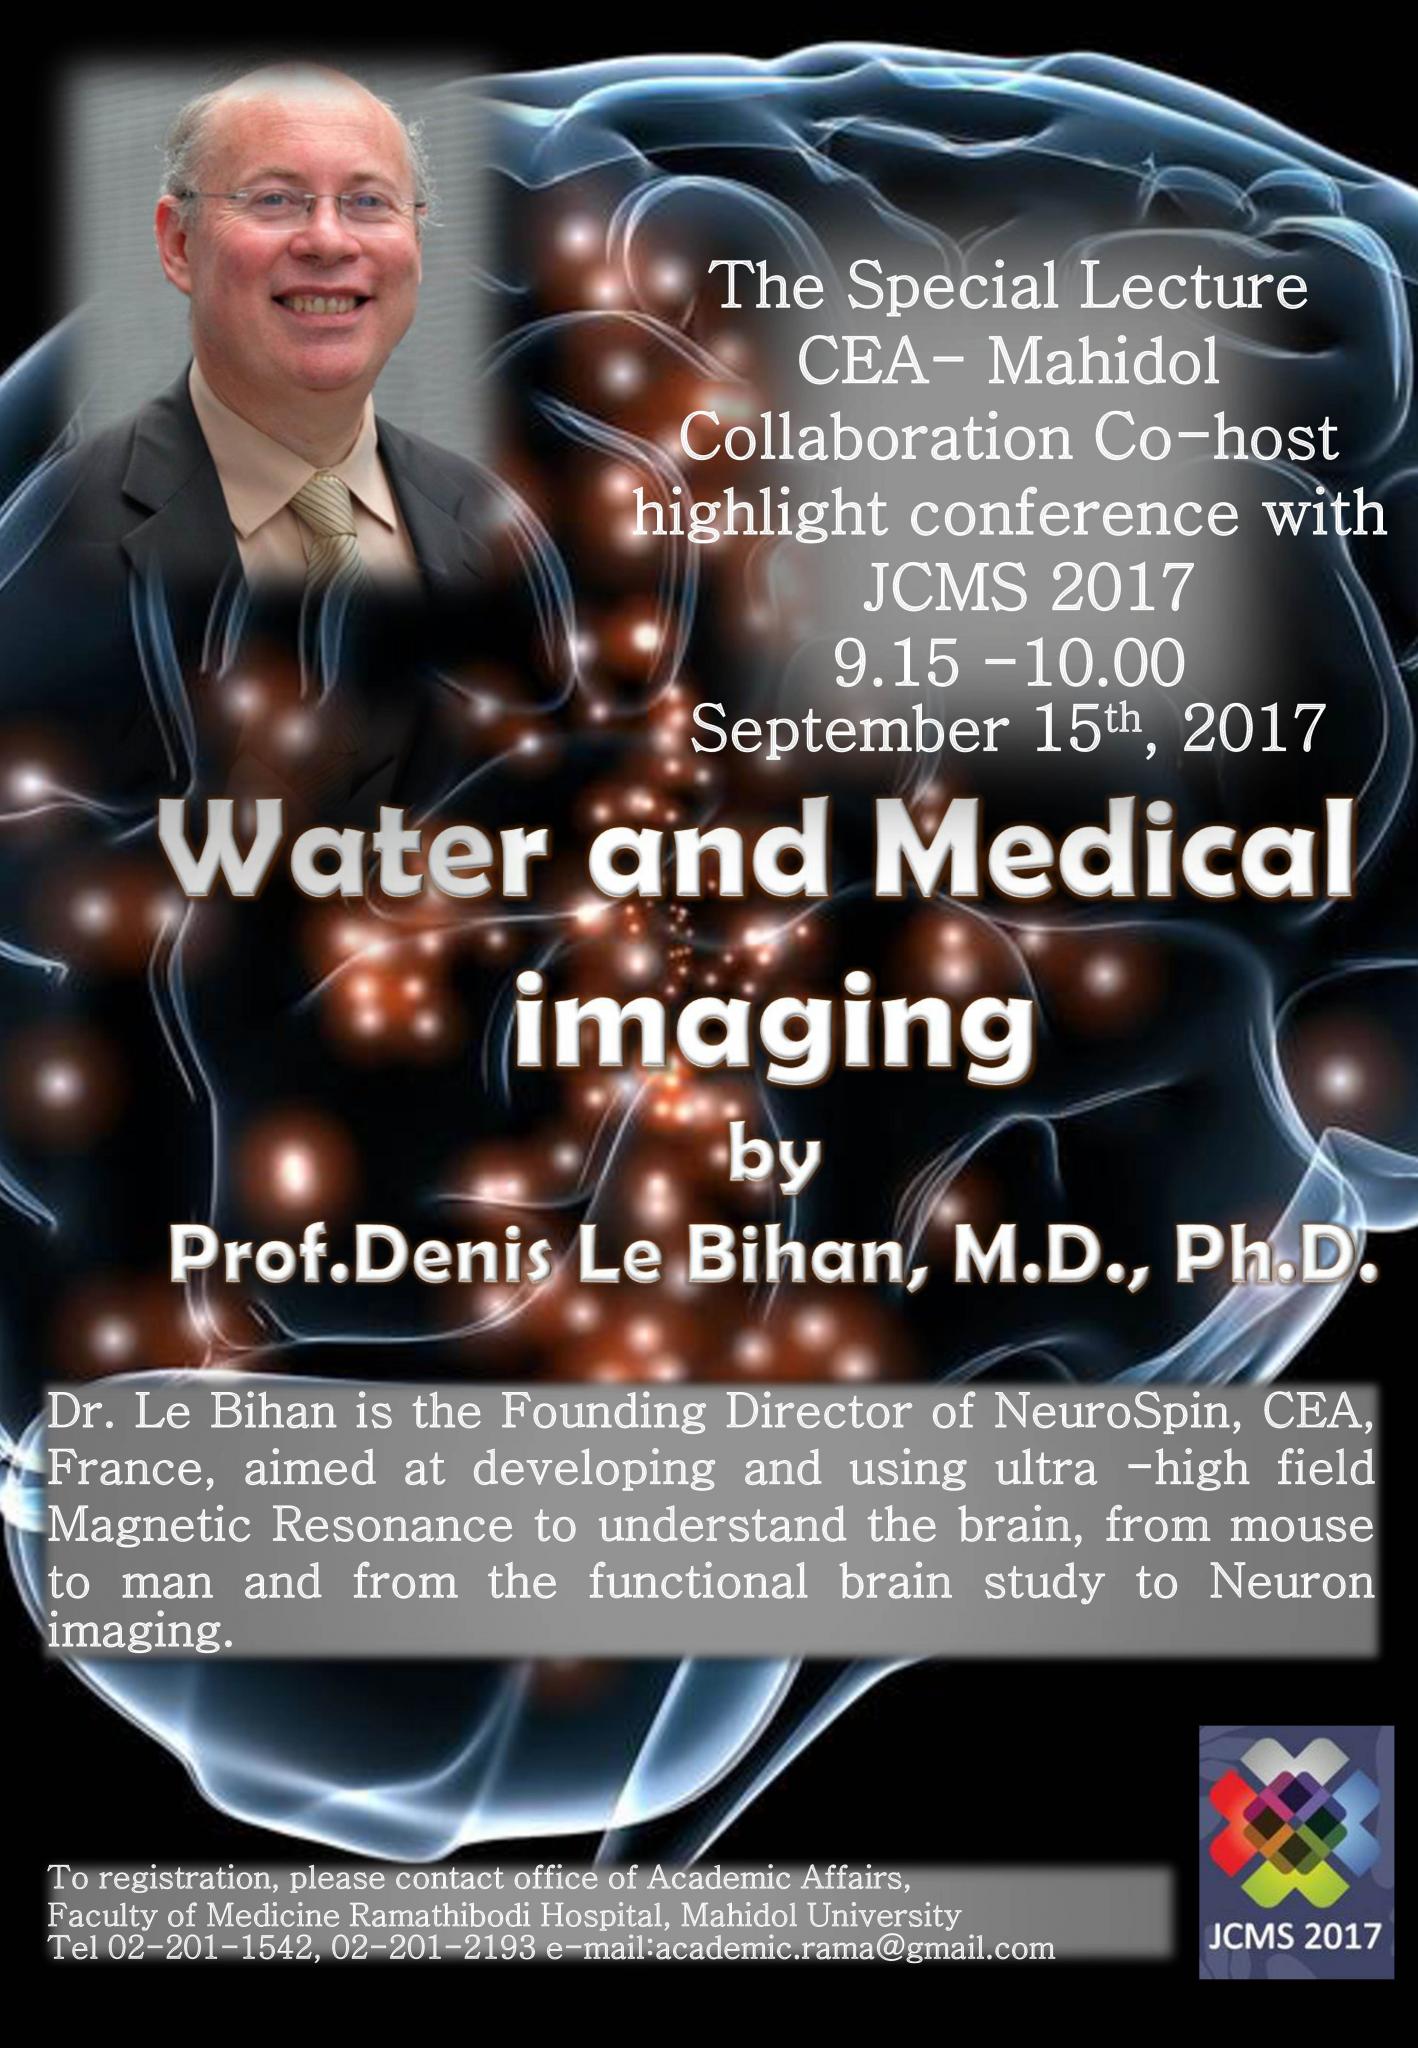 The Special Lecture CEA-Mahidol Collaboration Co-host highlight conference with JCMS 2017